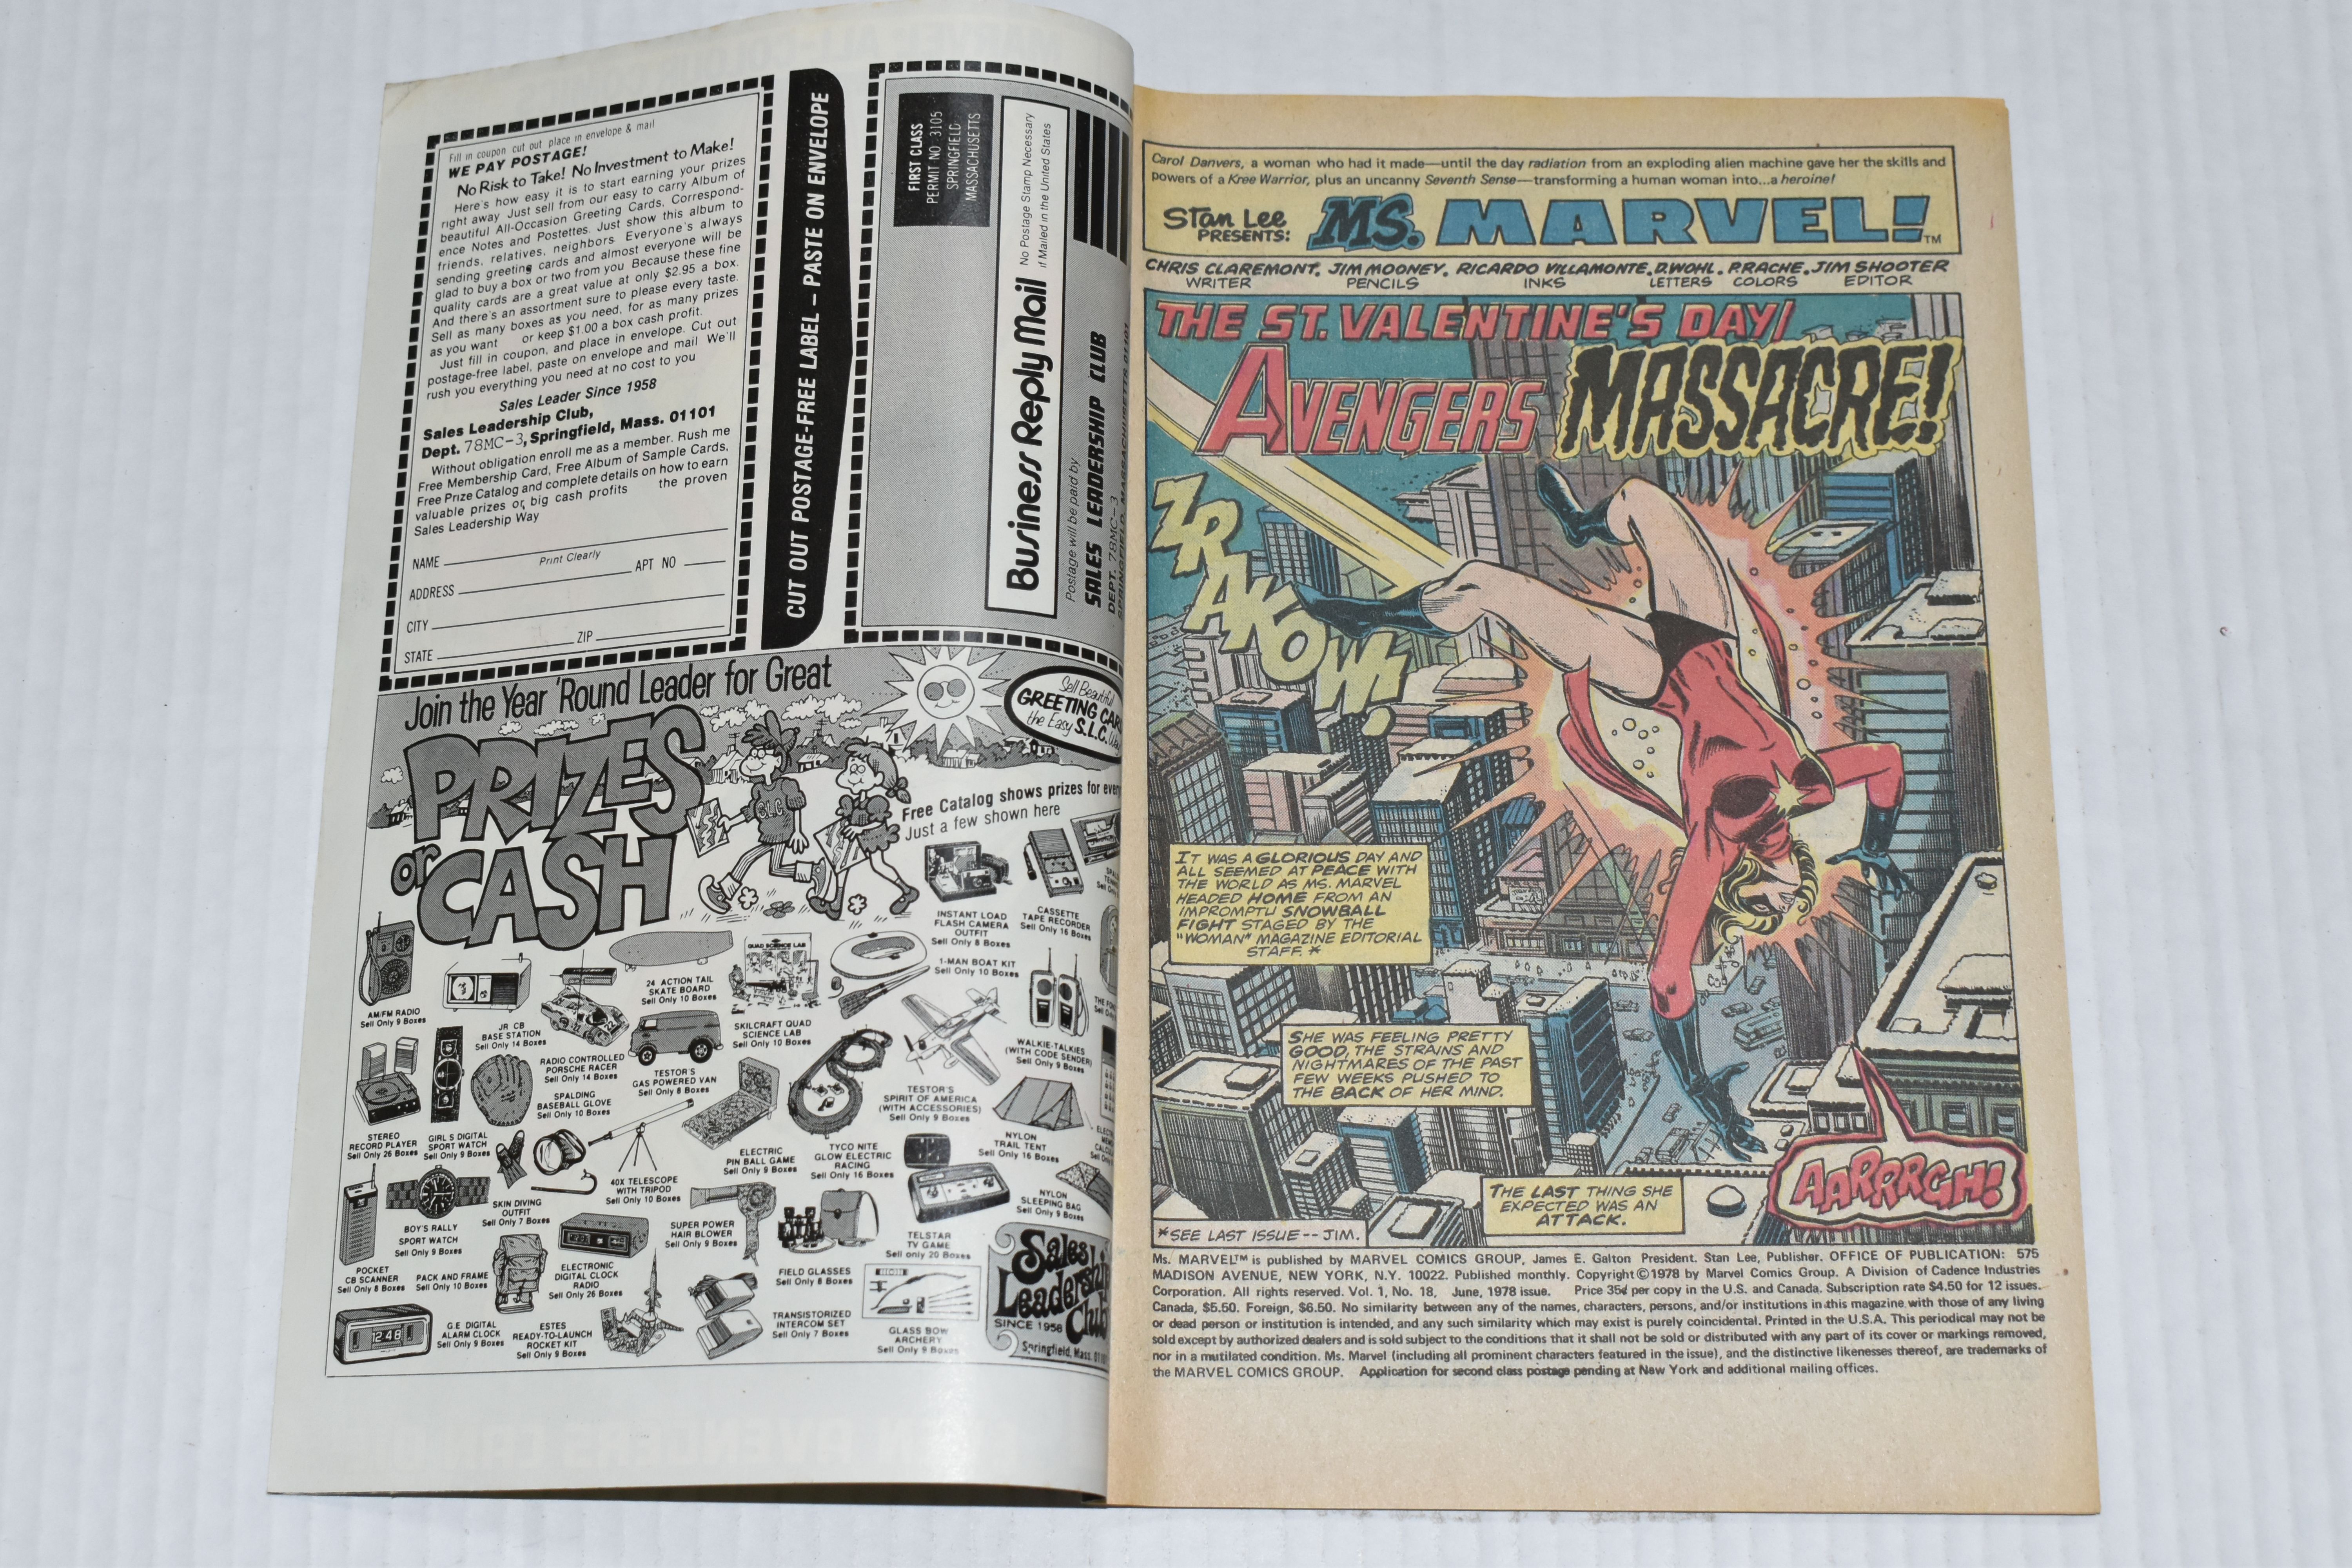 MS. MARVEL NOS. 16 & 18 MARVEL COMICS, first appearance of Mystique, comics show signs of wear, - Image 3 of 8